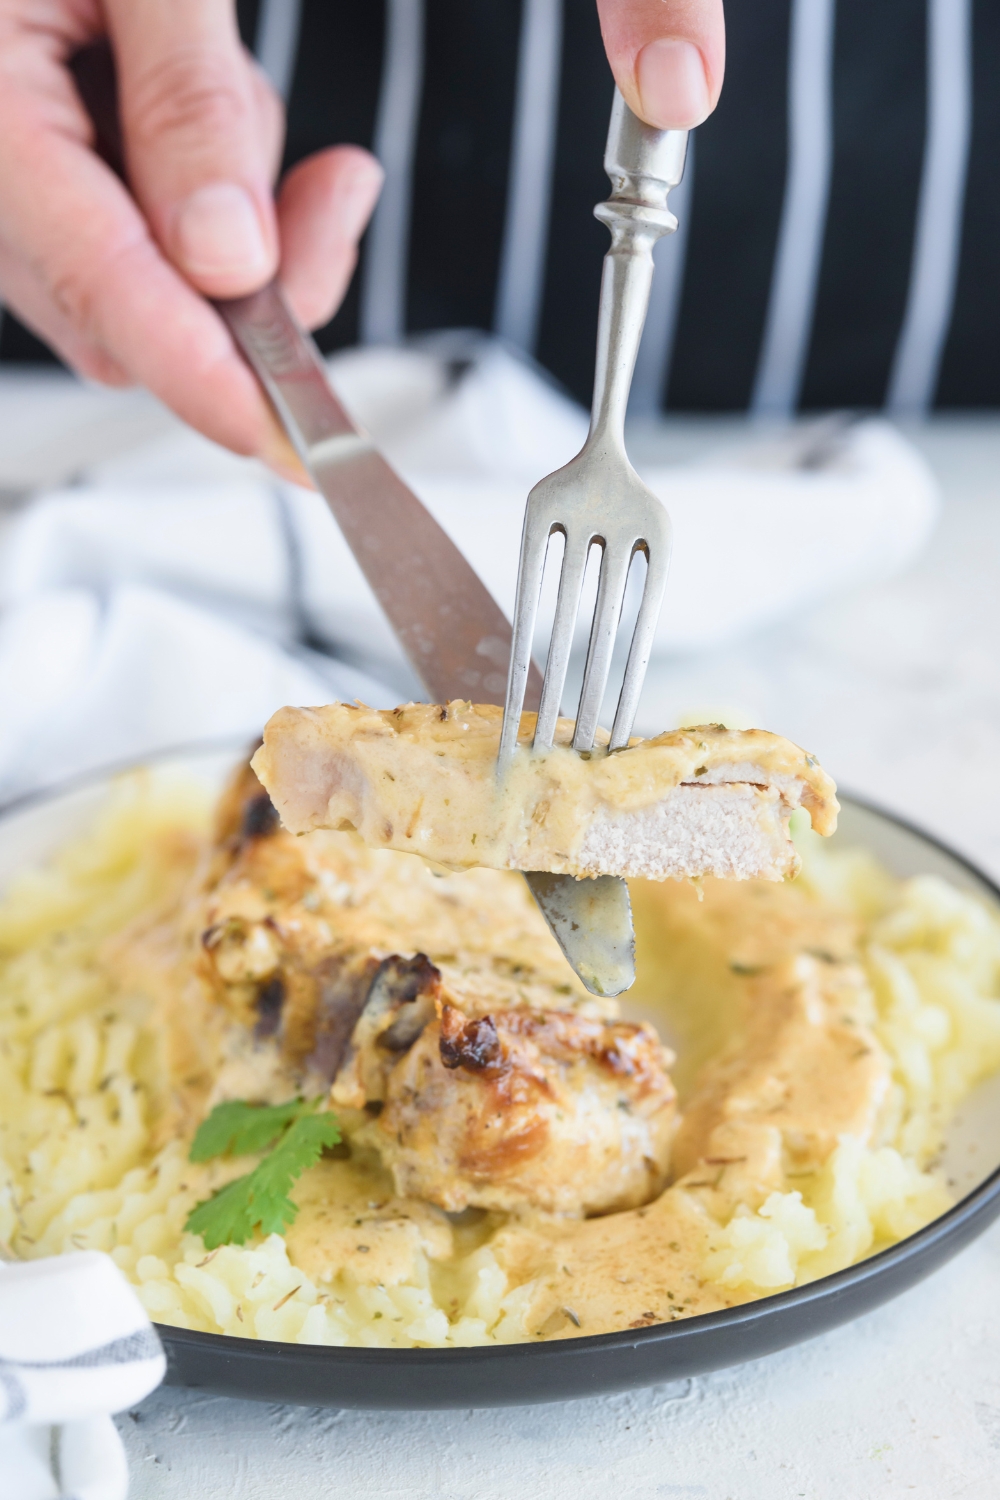 A person using a fork and knife to hold up a piece of pork chop covered in a brown cream sauce. The rest of the pork chop is in the background.